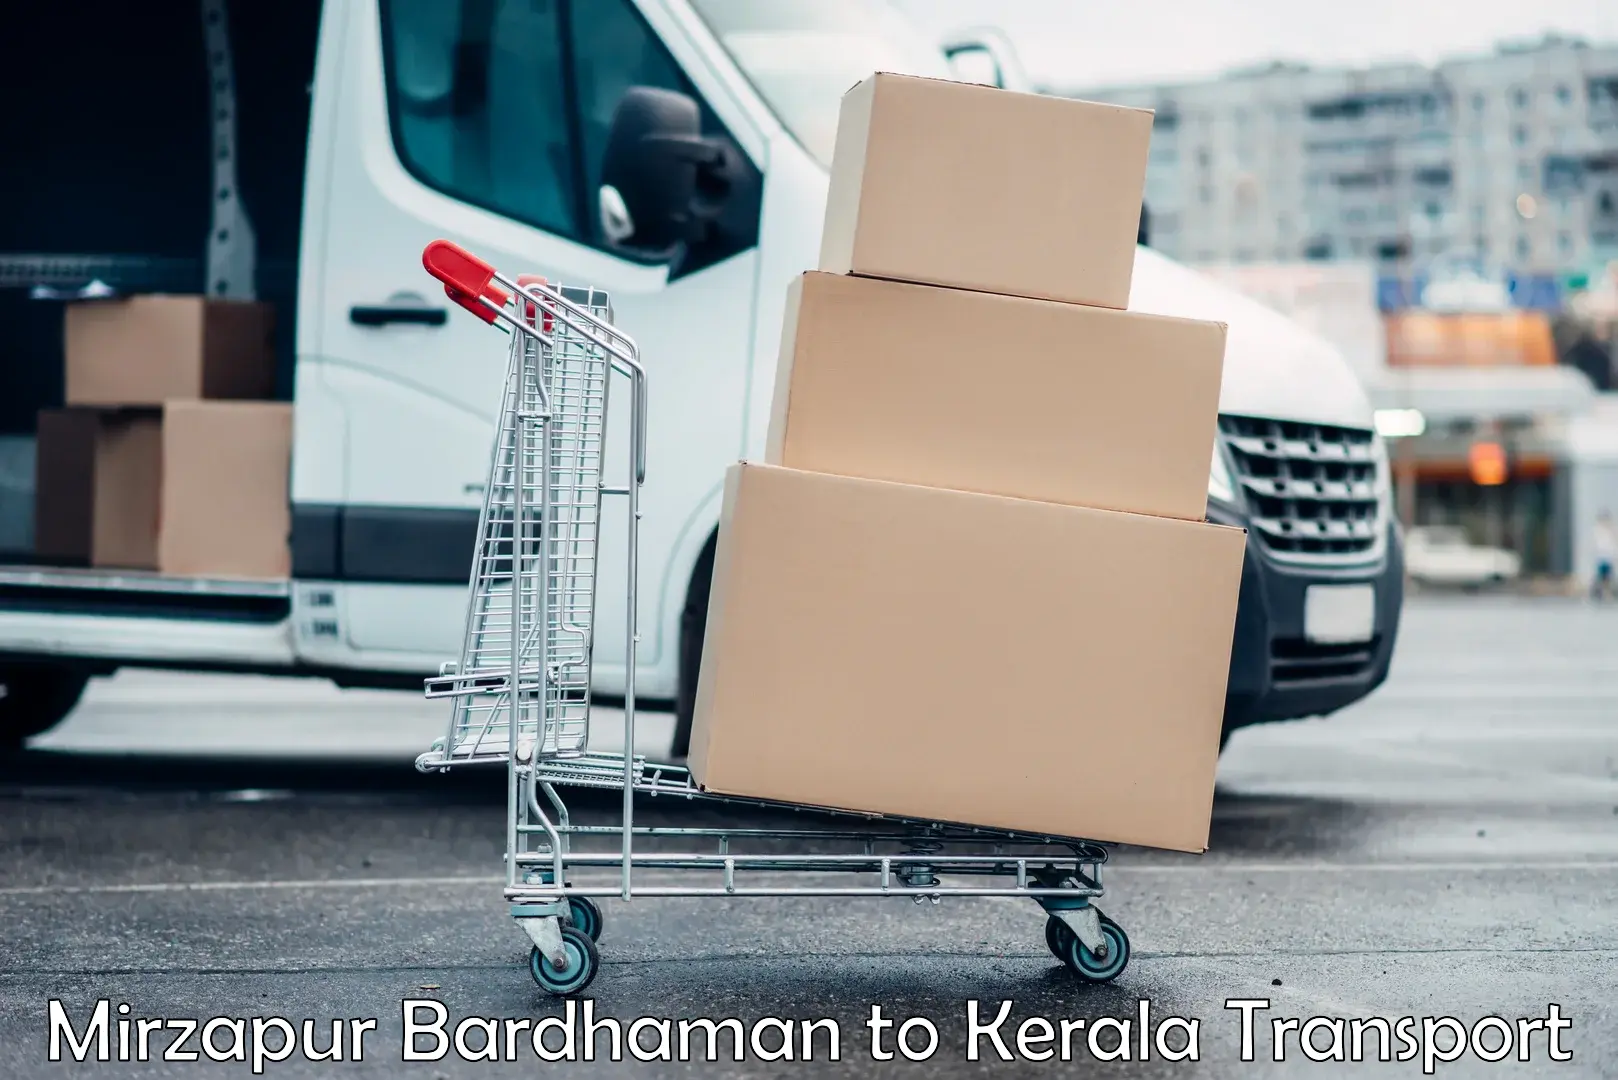 Road transport online services Mirzapur Bardhaman to Kasaragod